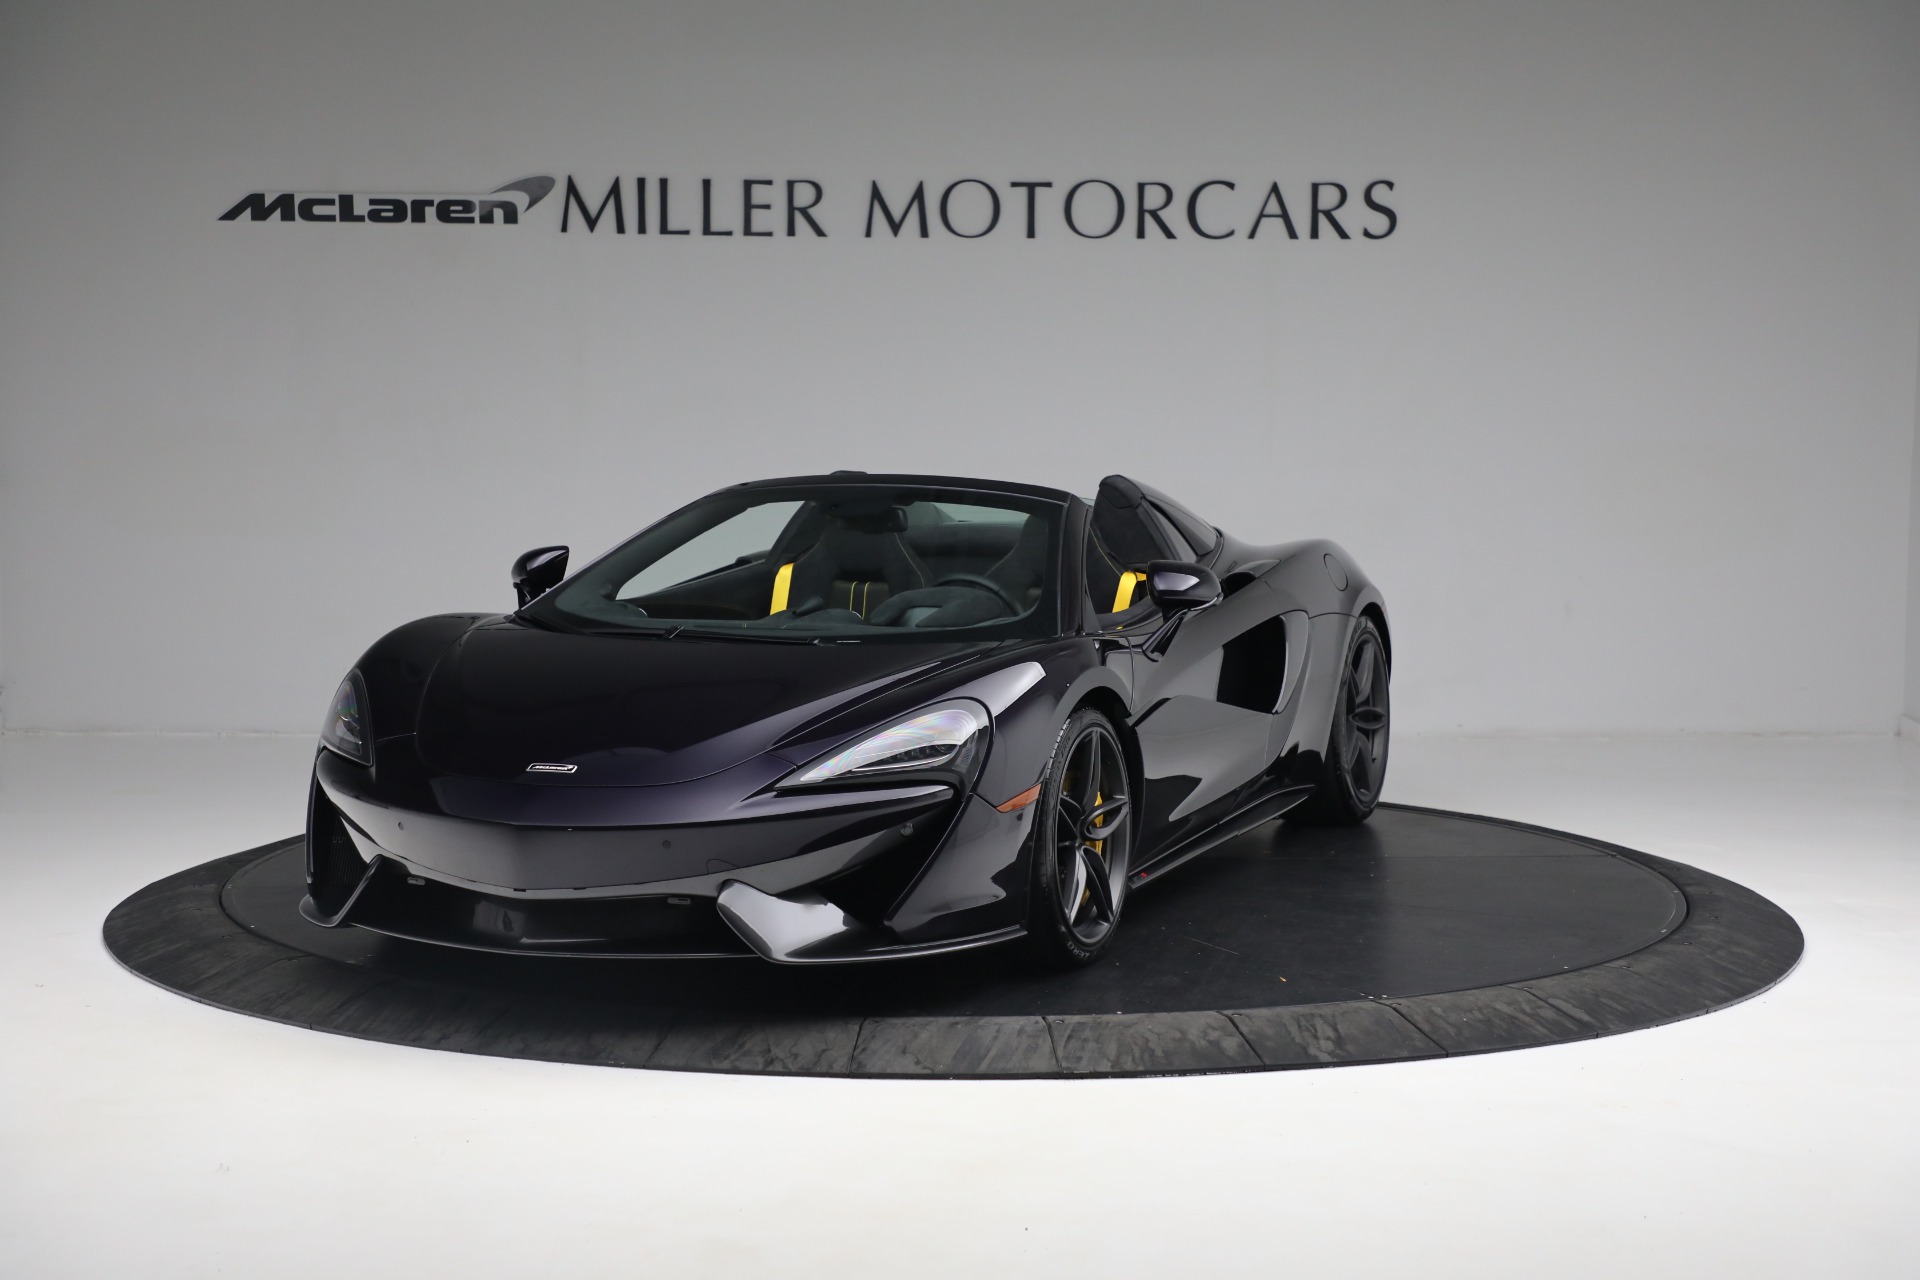 Used 2019 McLaren 570S Spider for sale Sold at Bentley Greenwich in Greenwich CT 06830 1